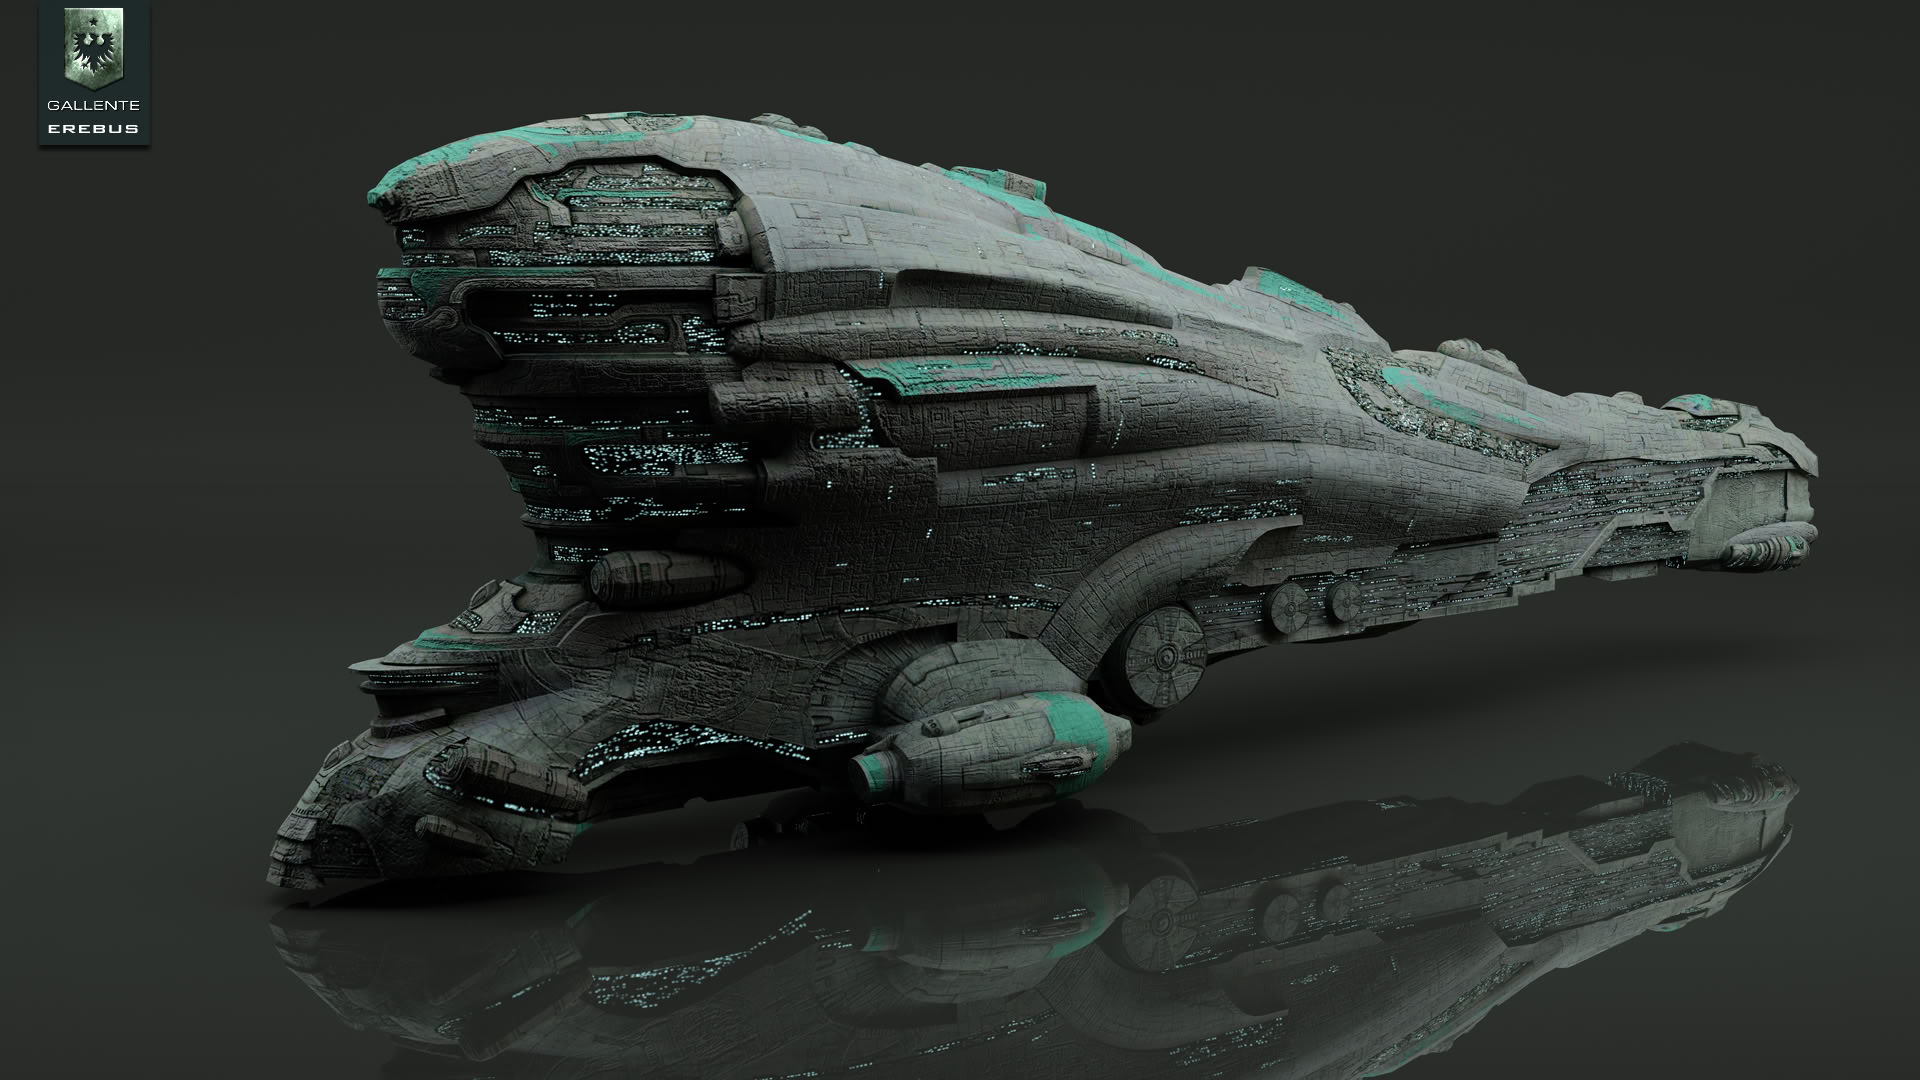 biggest bases and spaceships in video games - Erebus - EVE